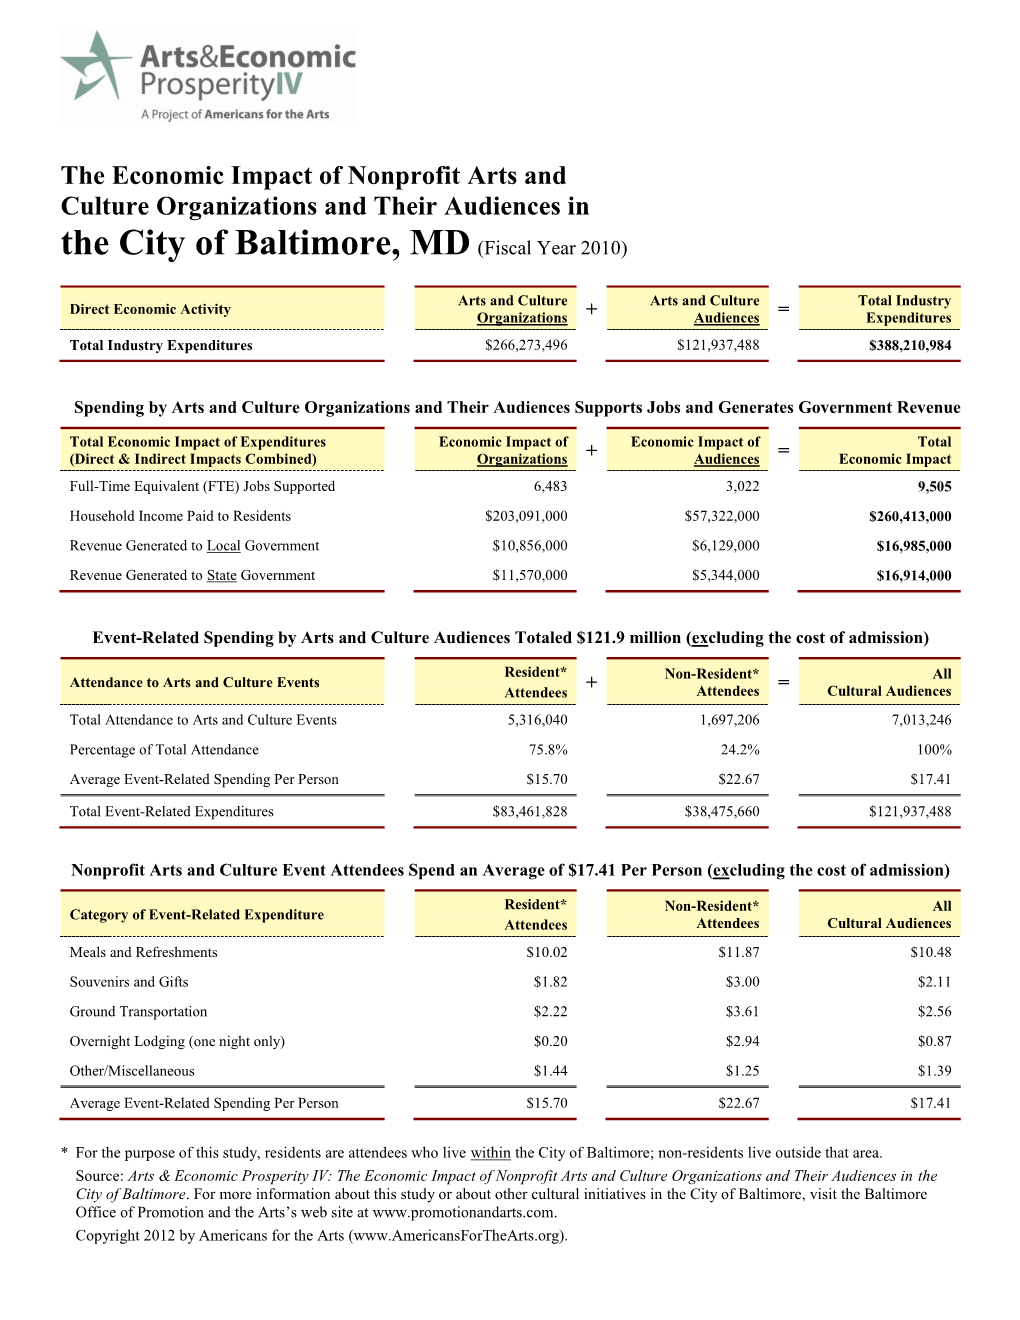 The Economic Impact of Nonprofit Arts and Culture Organizations and Their Audiences in the City of Baltimore, MD (Fiscal Year 2010)